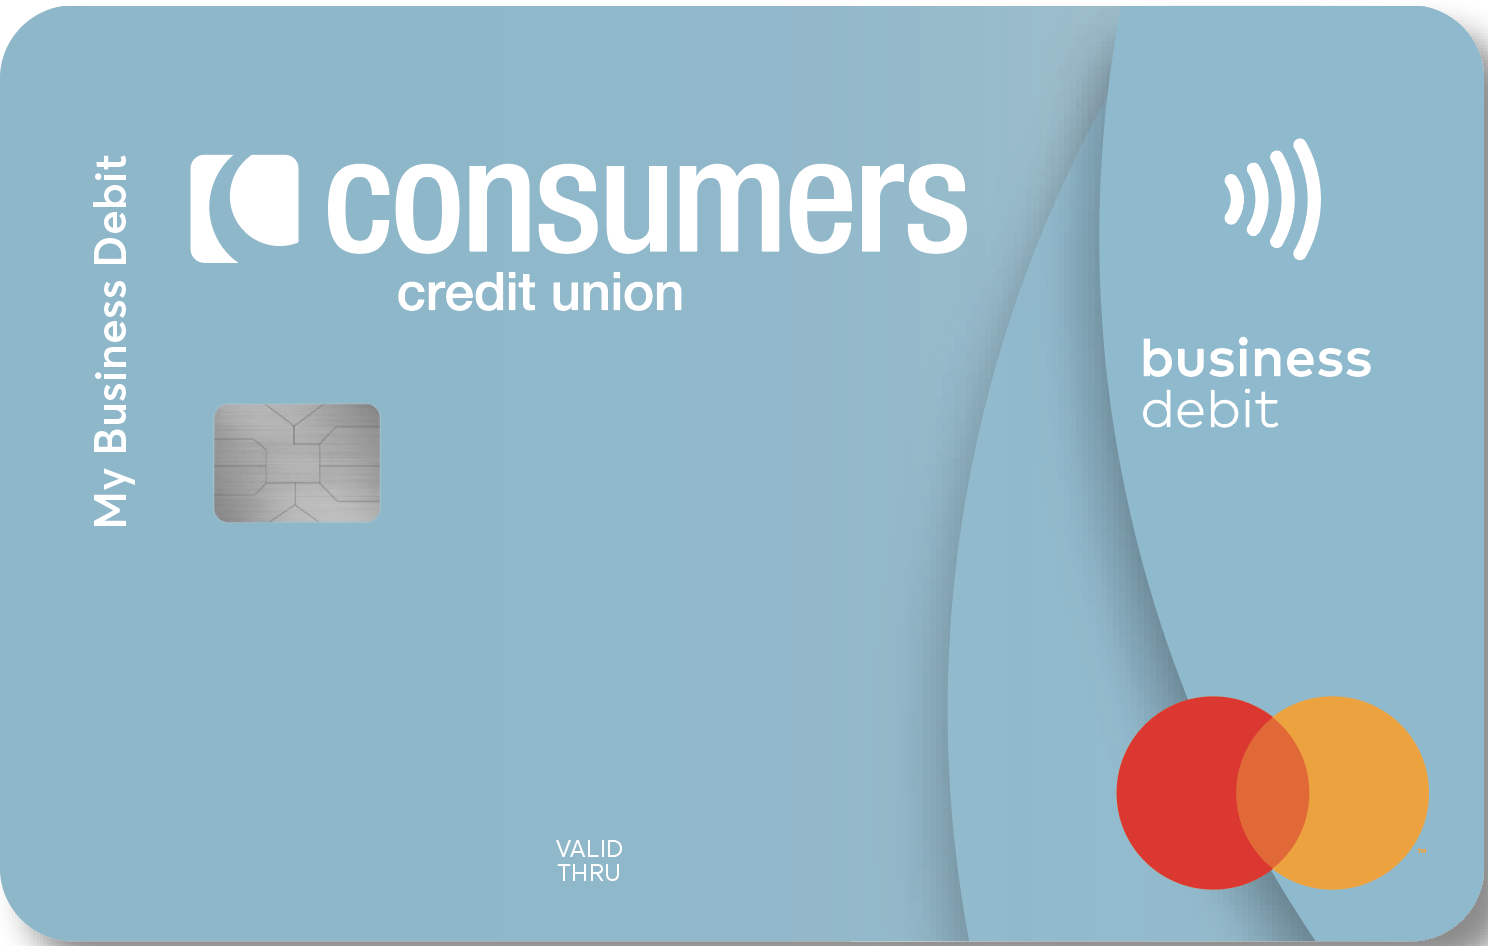 A brand new business debit is on the way!